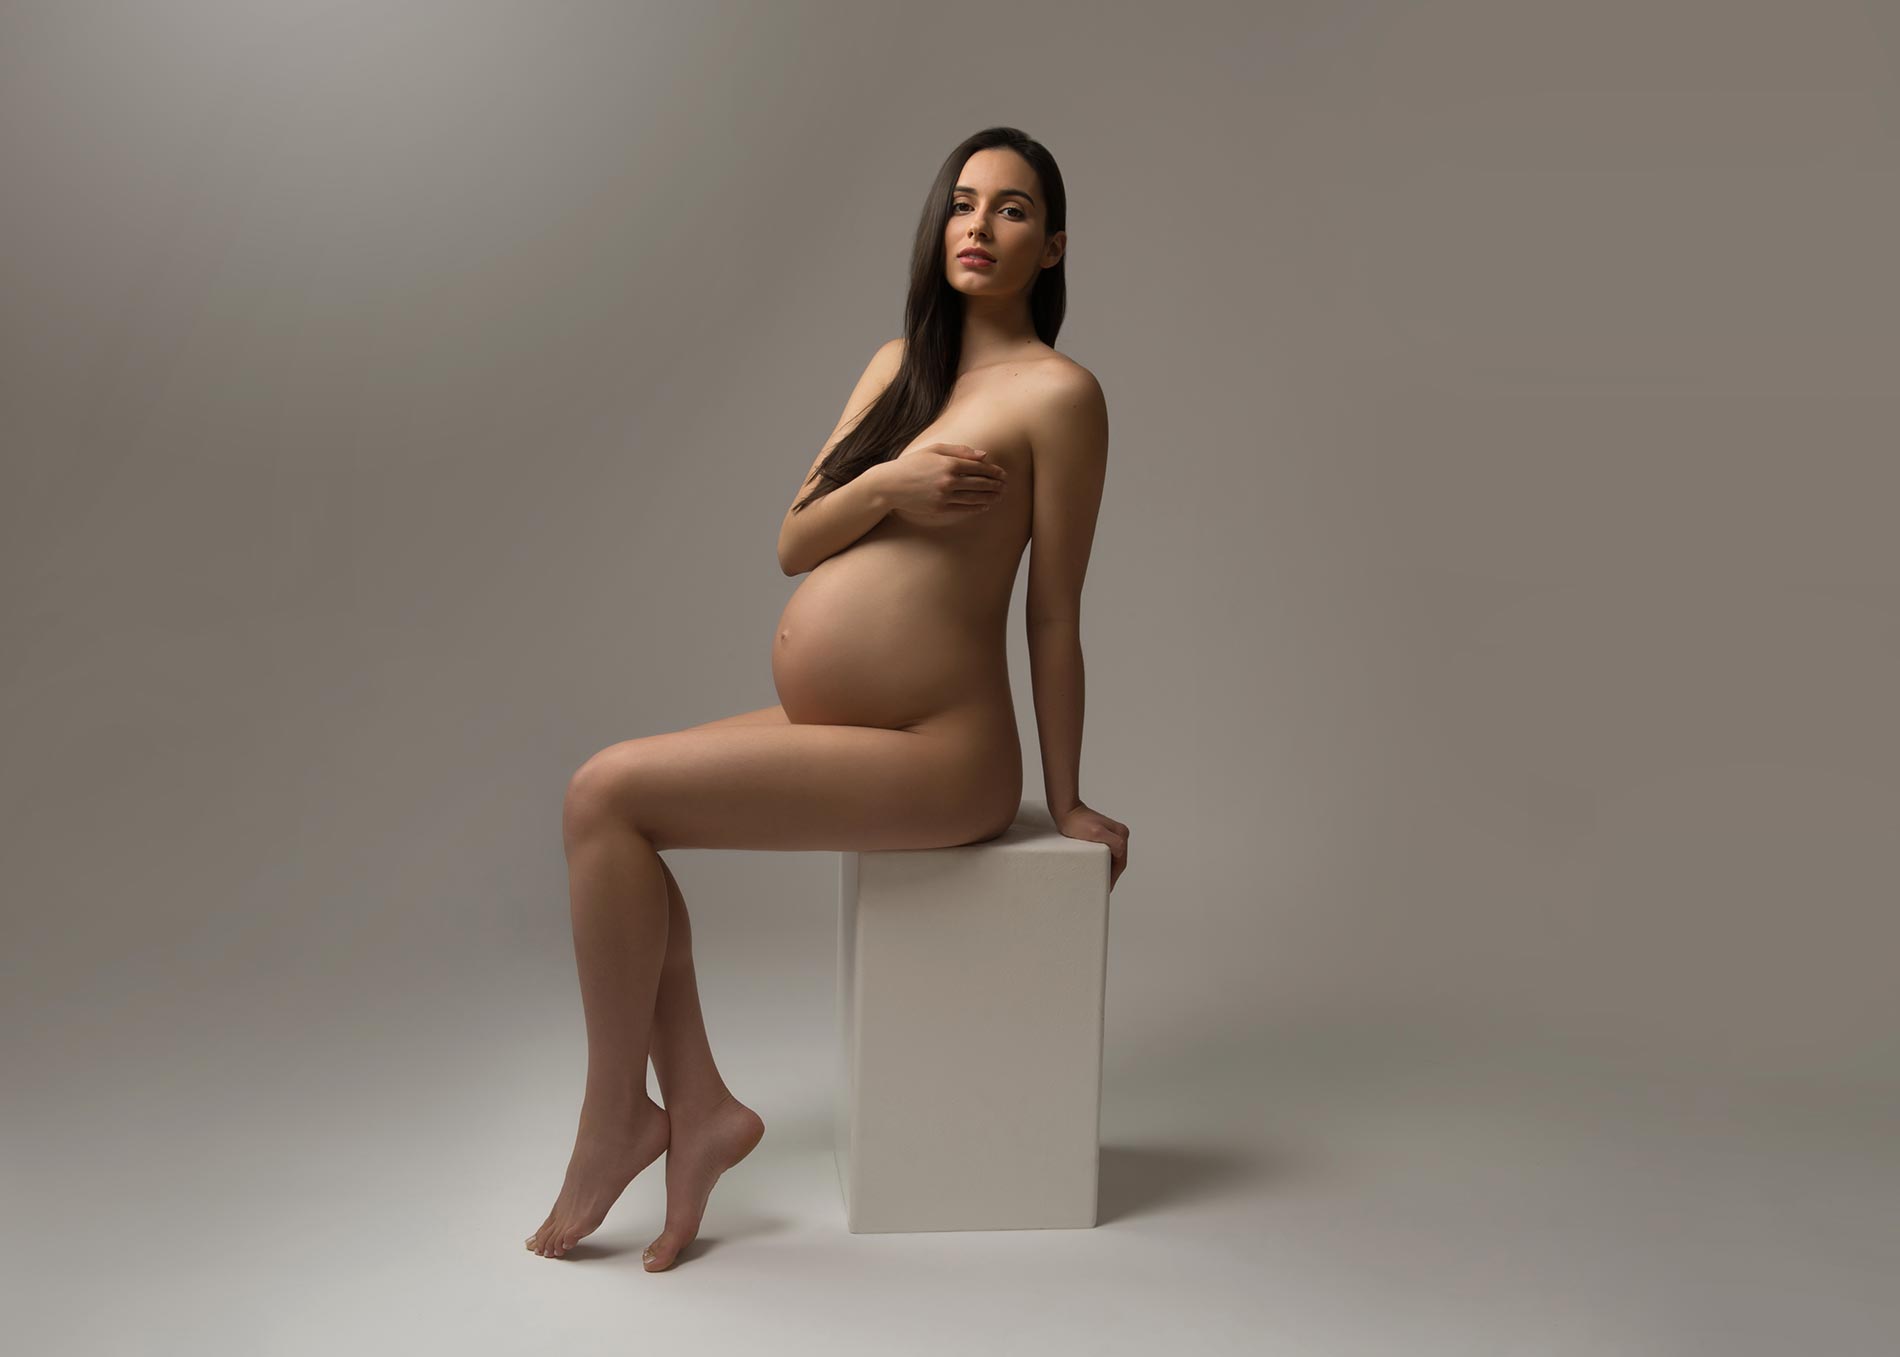 Pregnant woman posing for a maternity portrait at a NYC studio